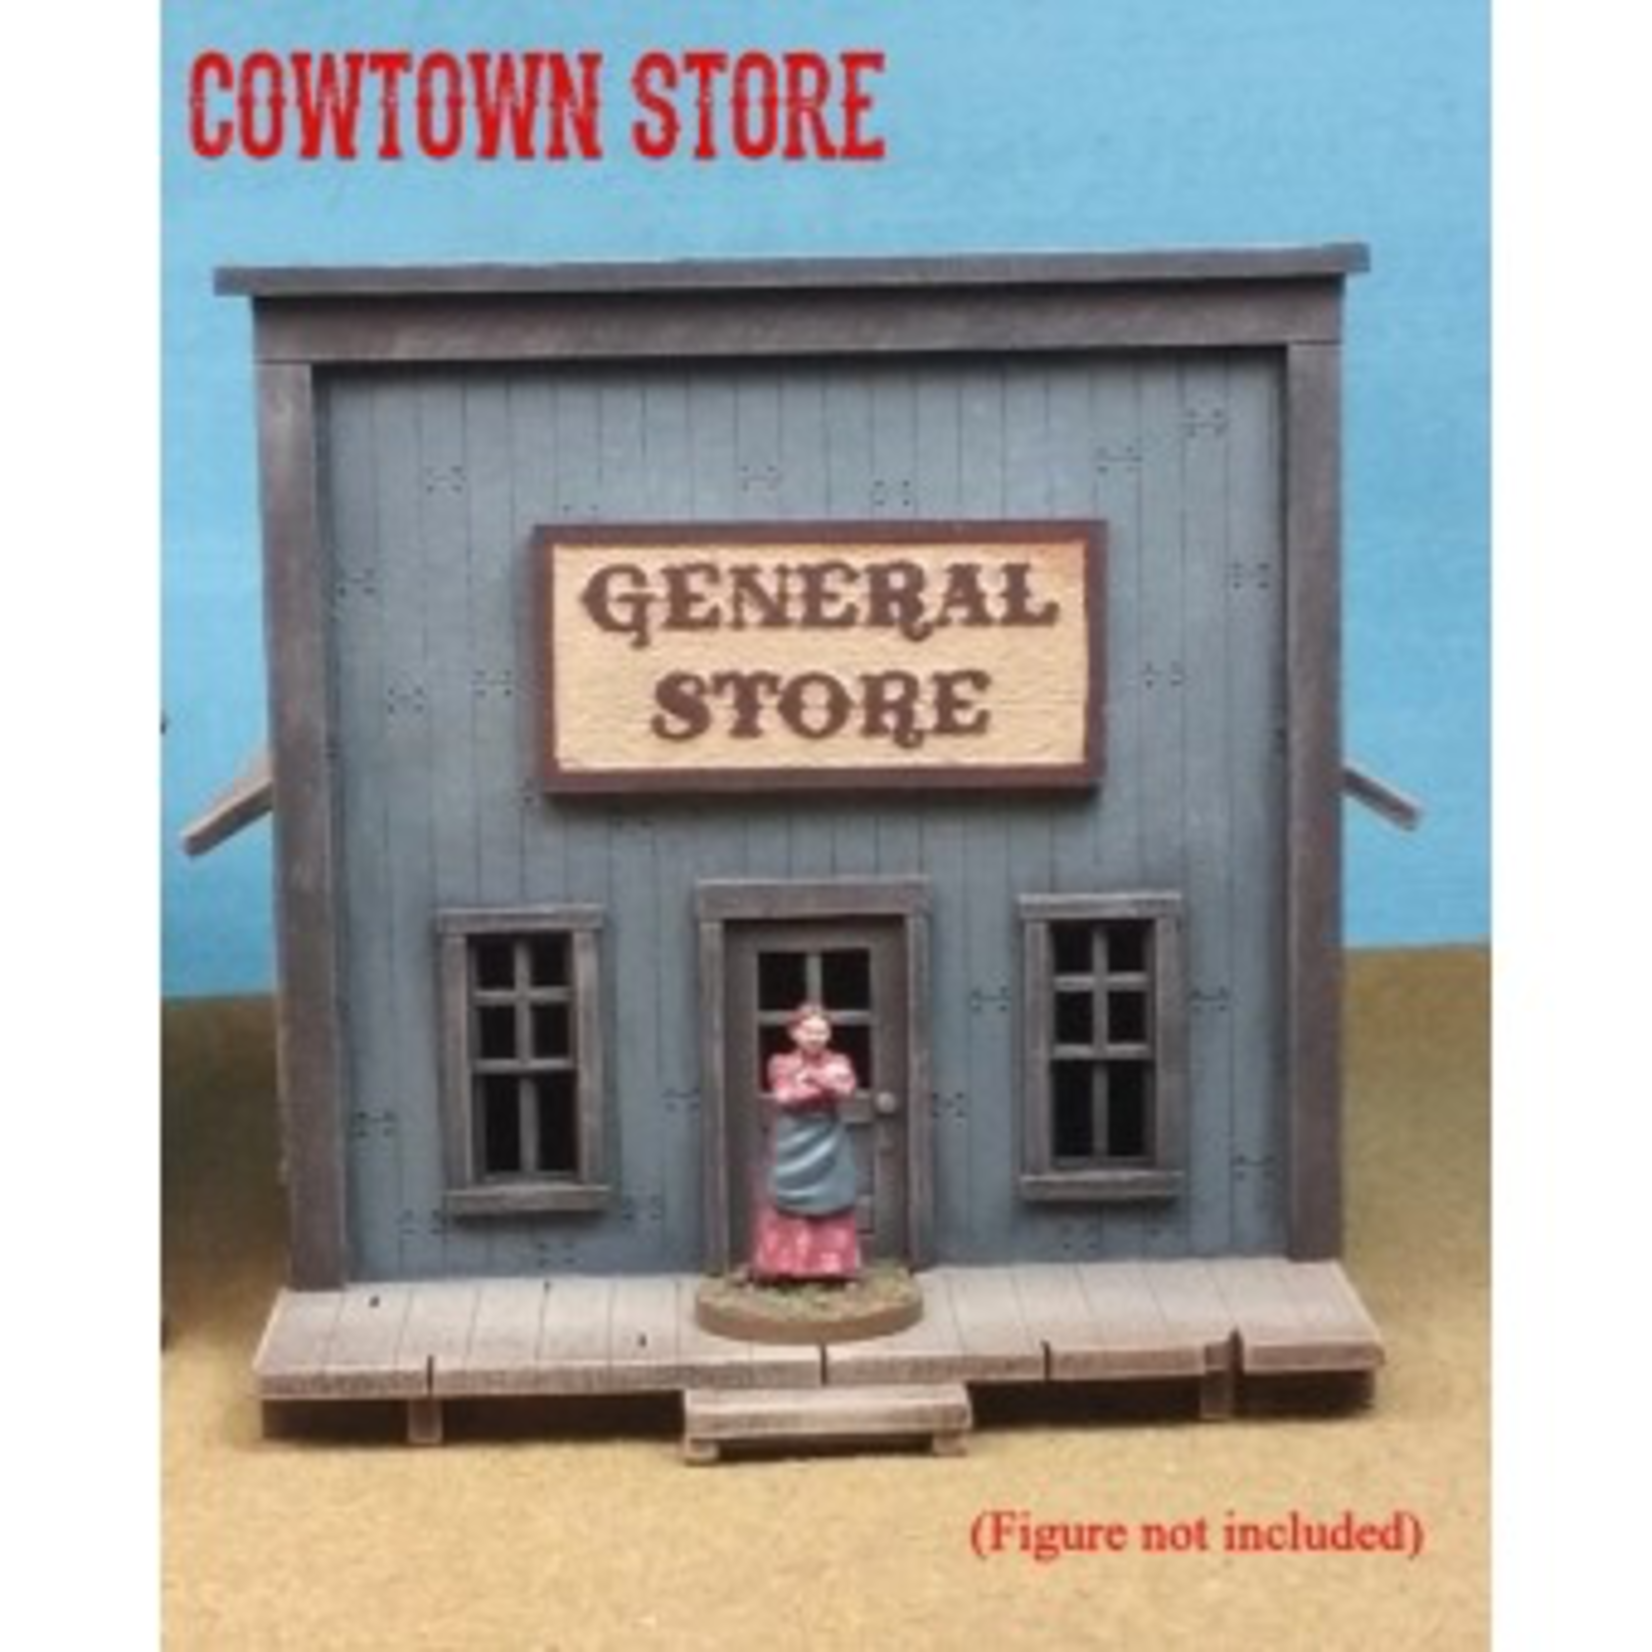 Cowtown Store